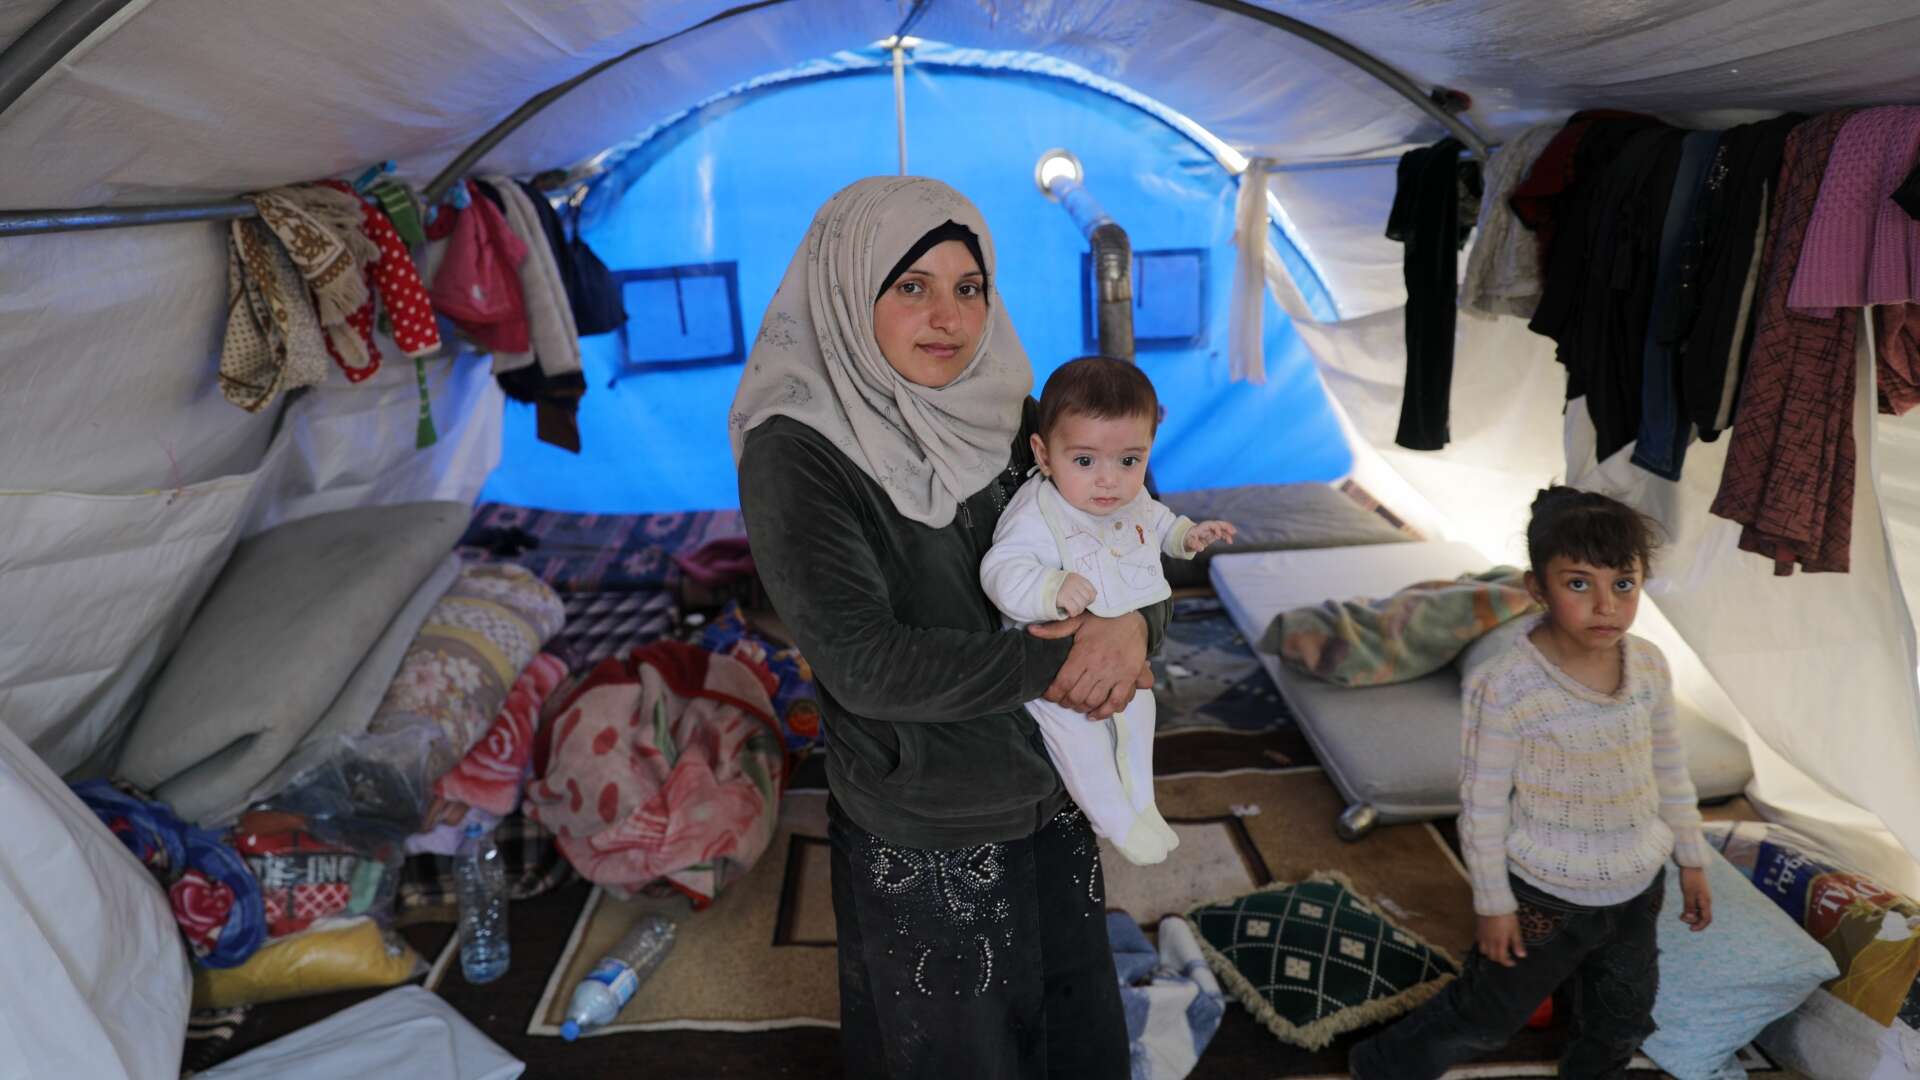 A family in Syria poses for a photo in their makeshift shelter in a refugee camp.